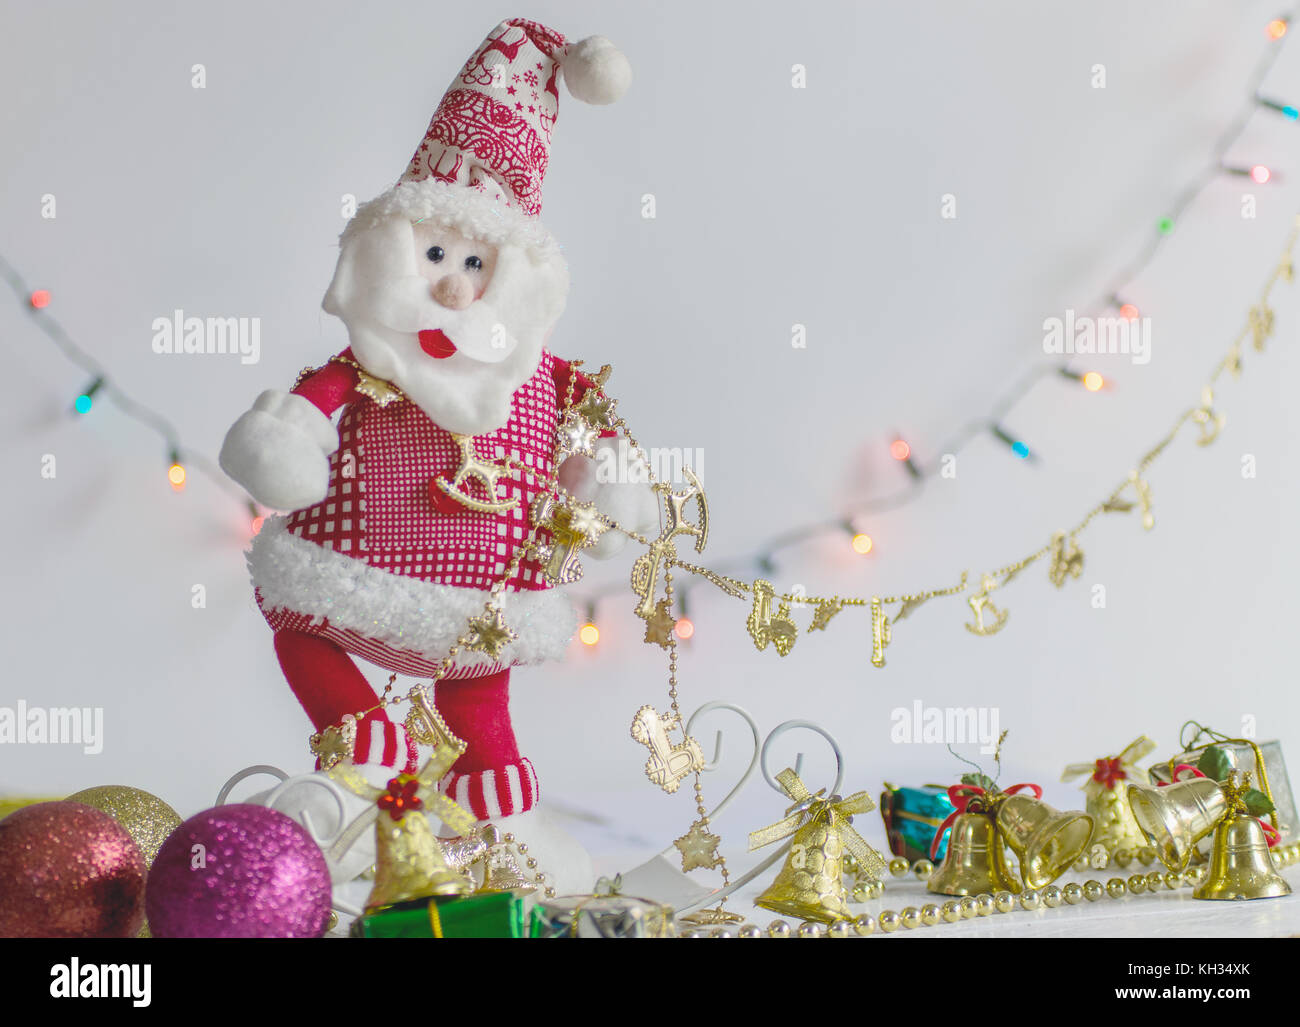 Santa Claus decoration stuffed toy, on a white background and surface, with colorful bokeh lights and christmas decoration in the background Stock Photo